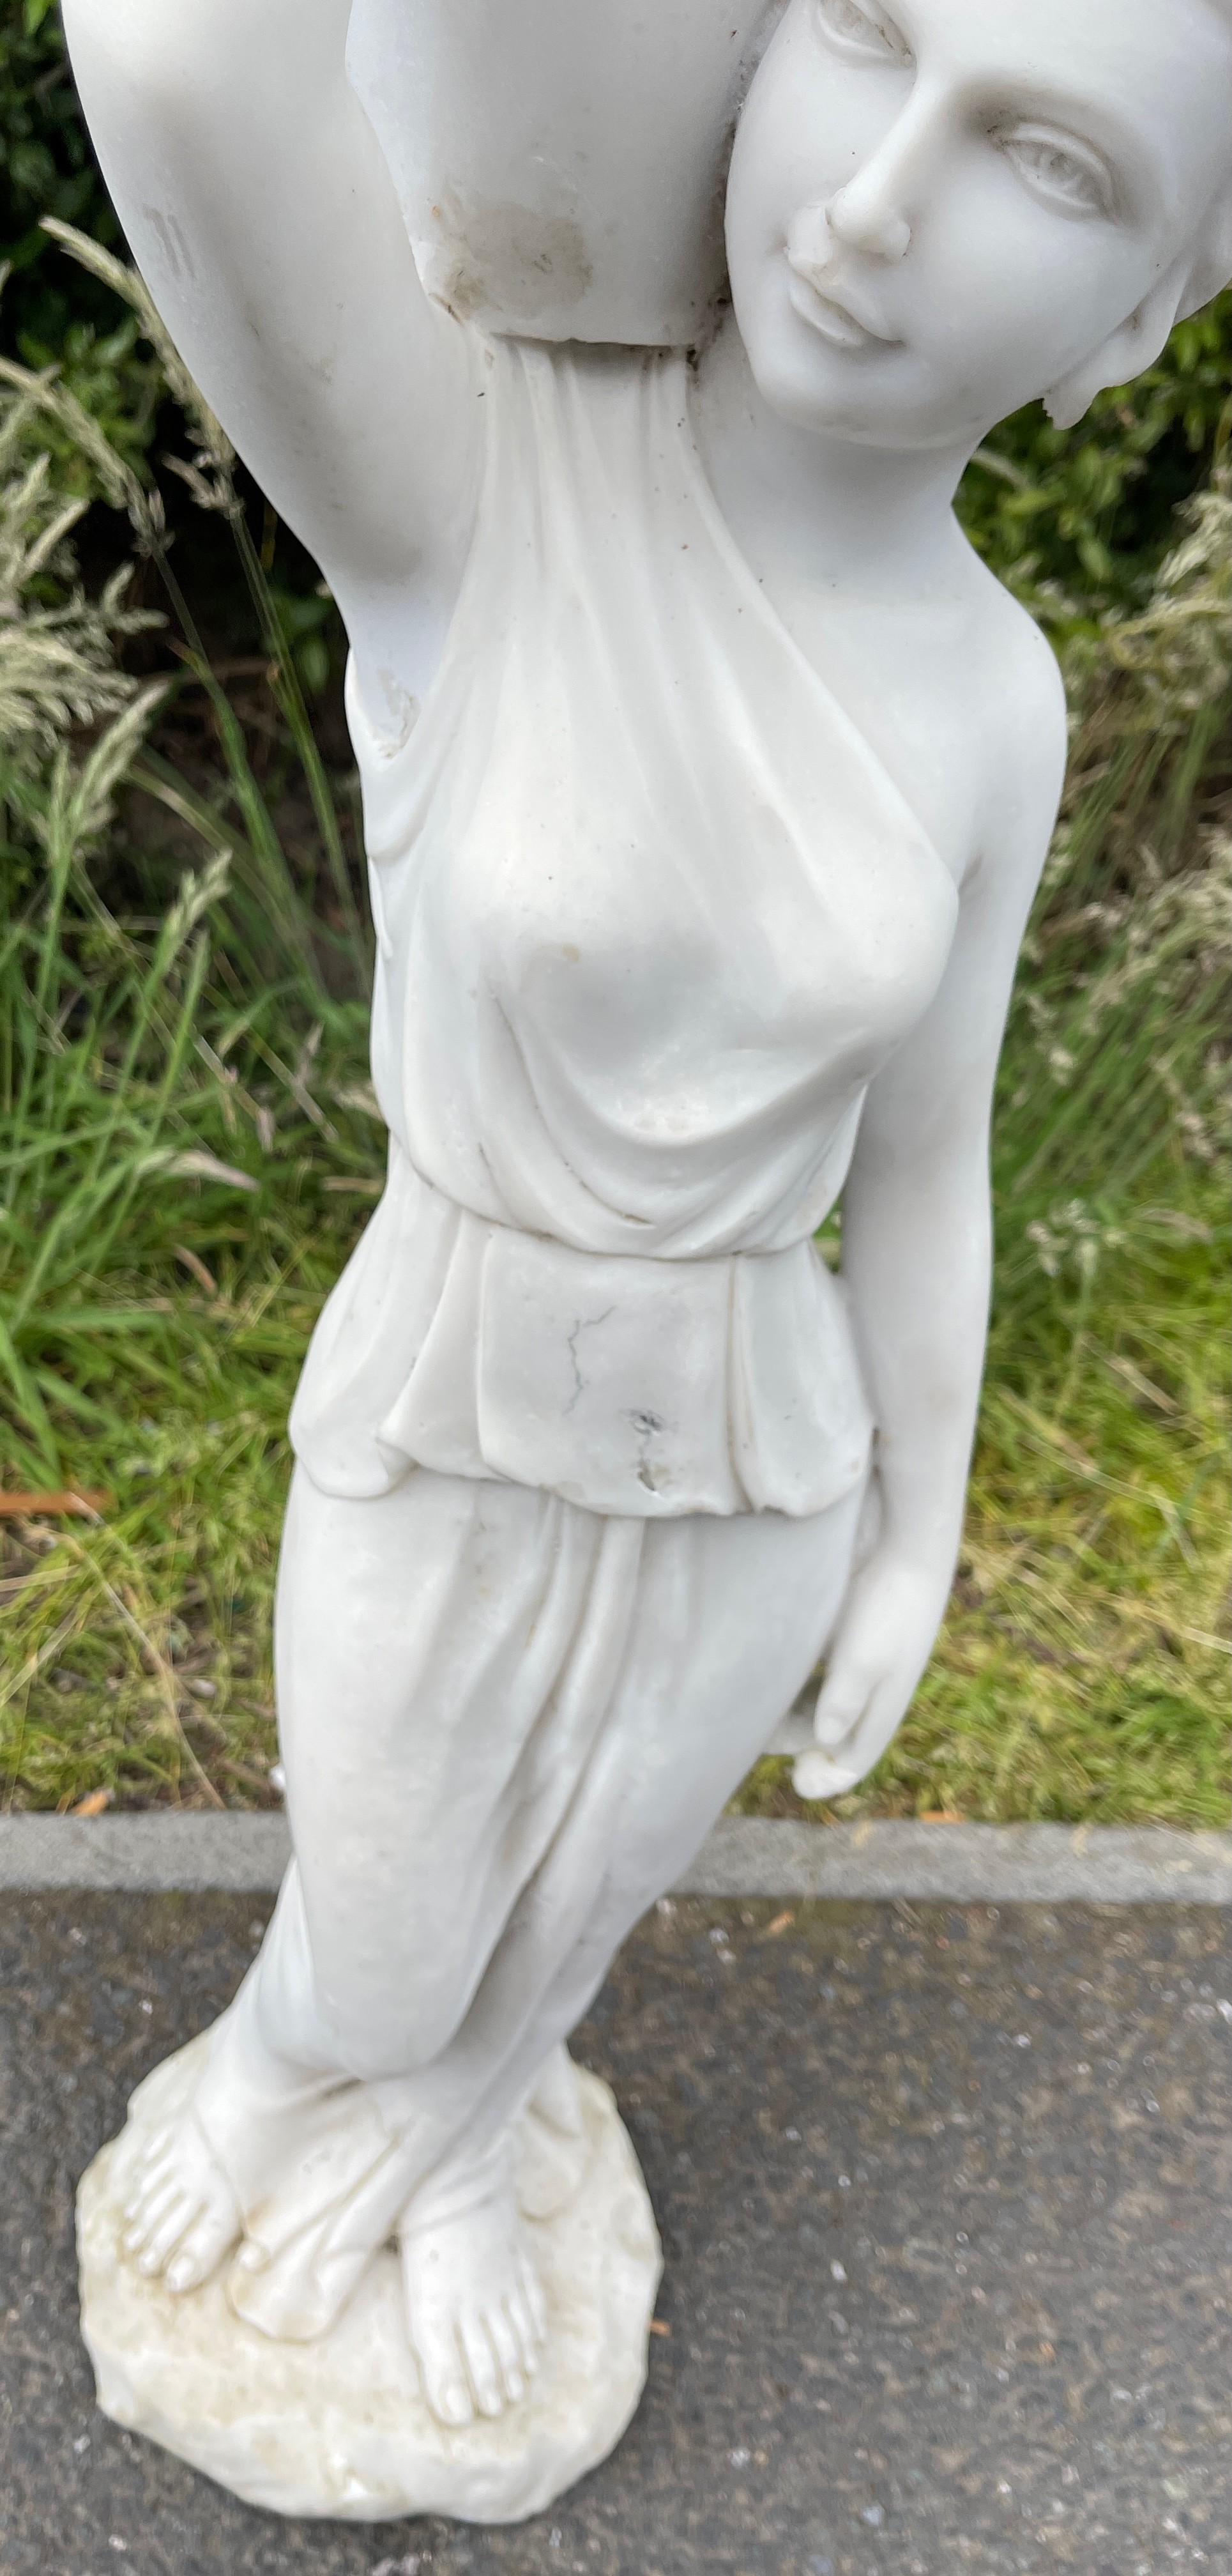 White composite lady figurine / statue, overall approximate height 31 inches - Image 5 of 5